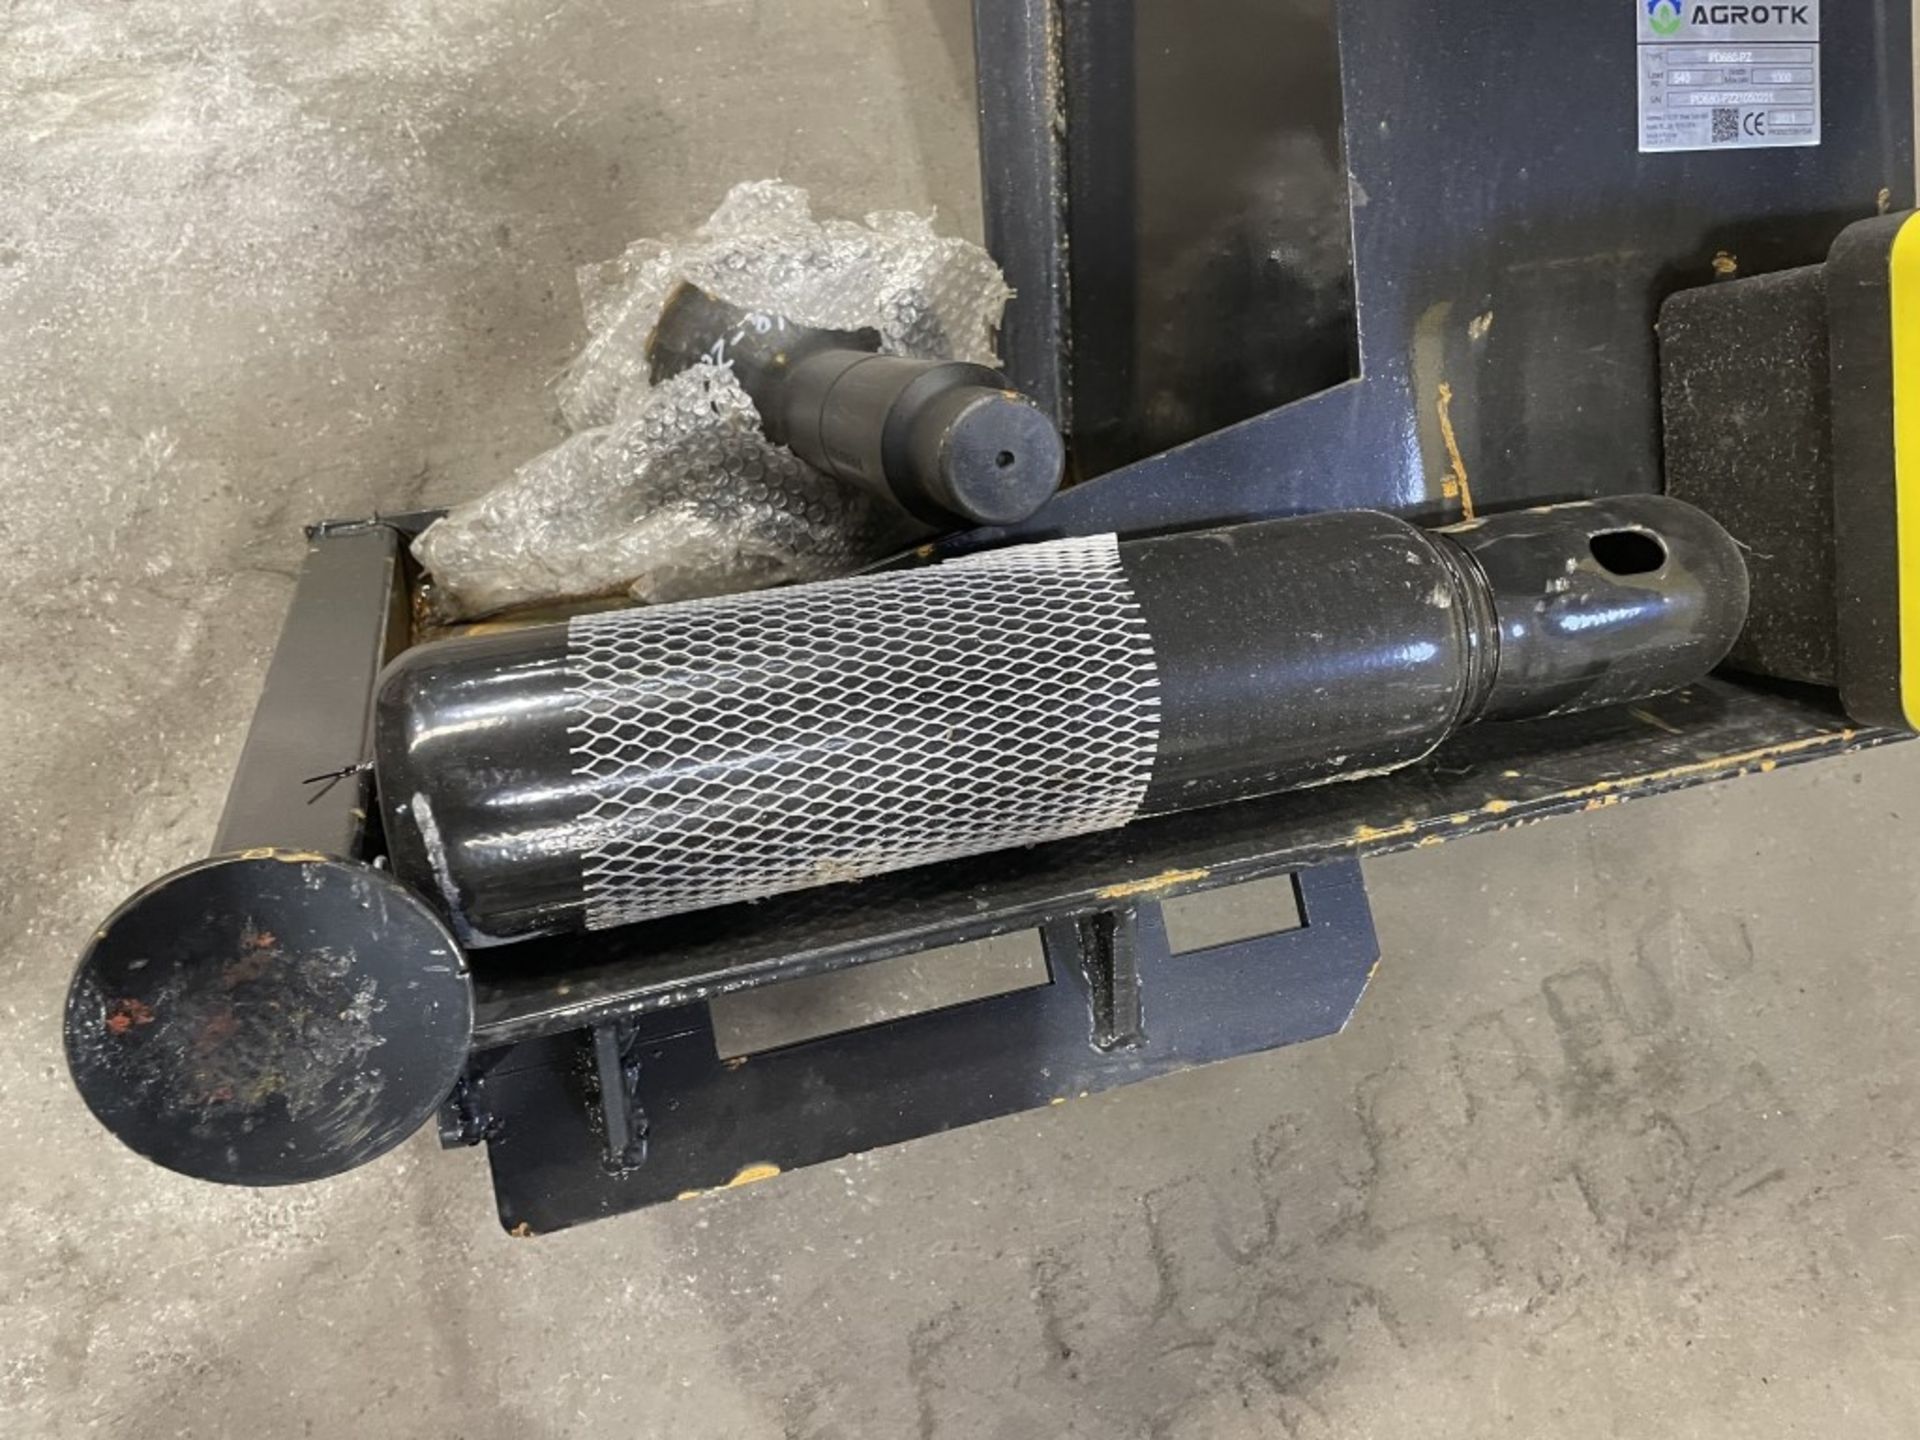 2021 Agrotk 680 Hydraulic Post Driver - Image 6 of 7